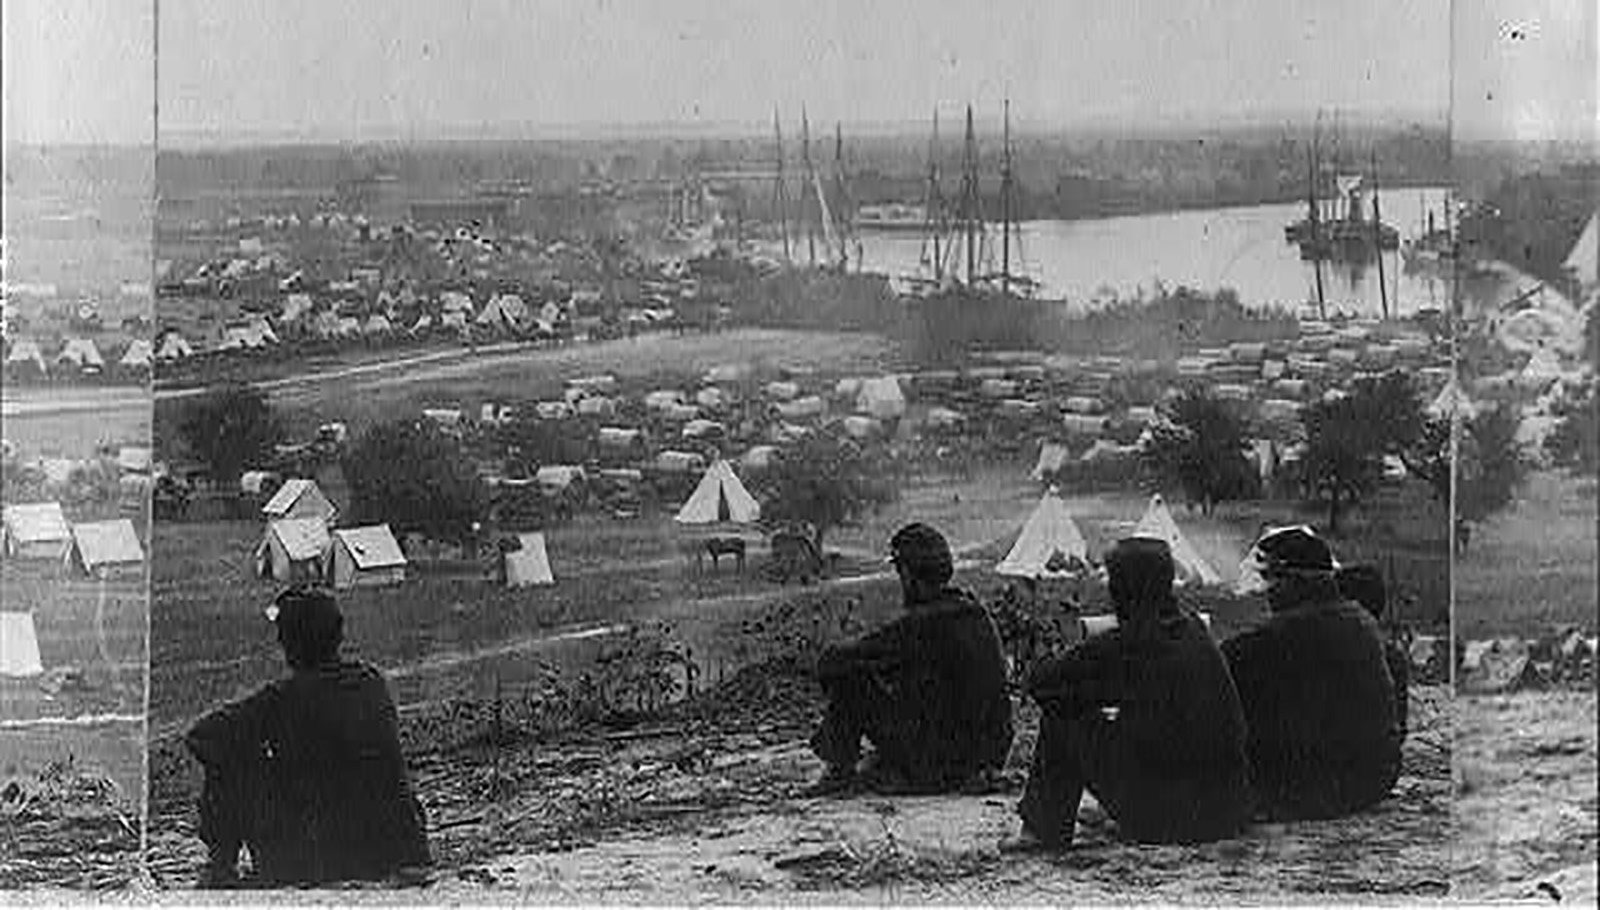 An image of four men sitting on a hill overlooking Cumberland bay outside of a military settlement during the civil war